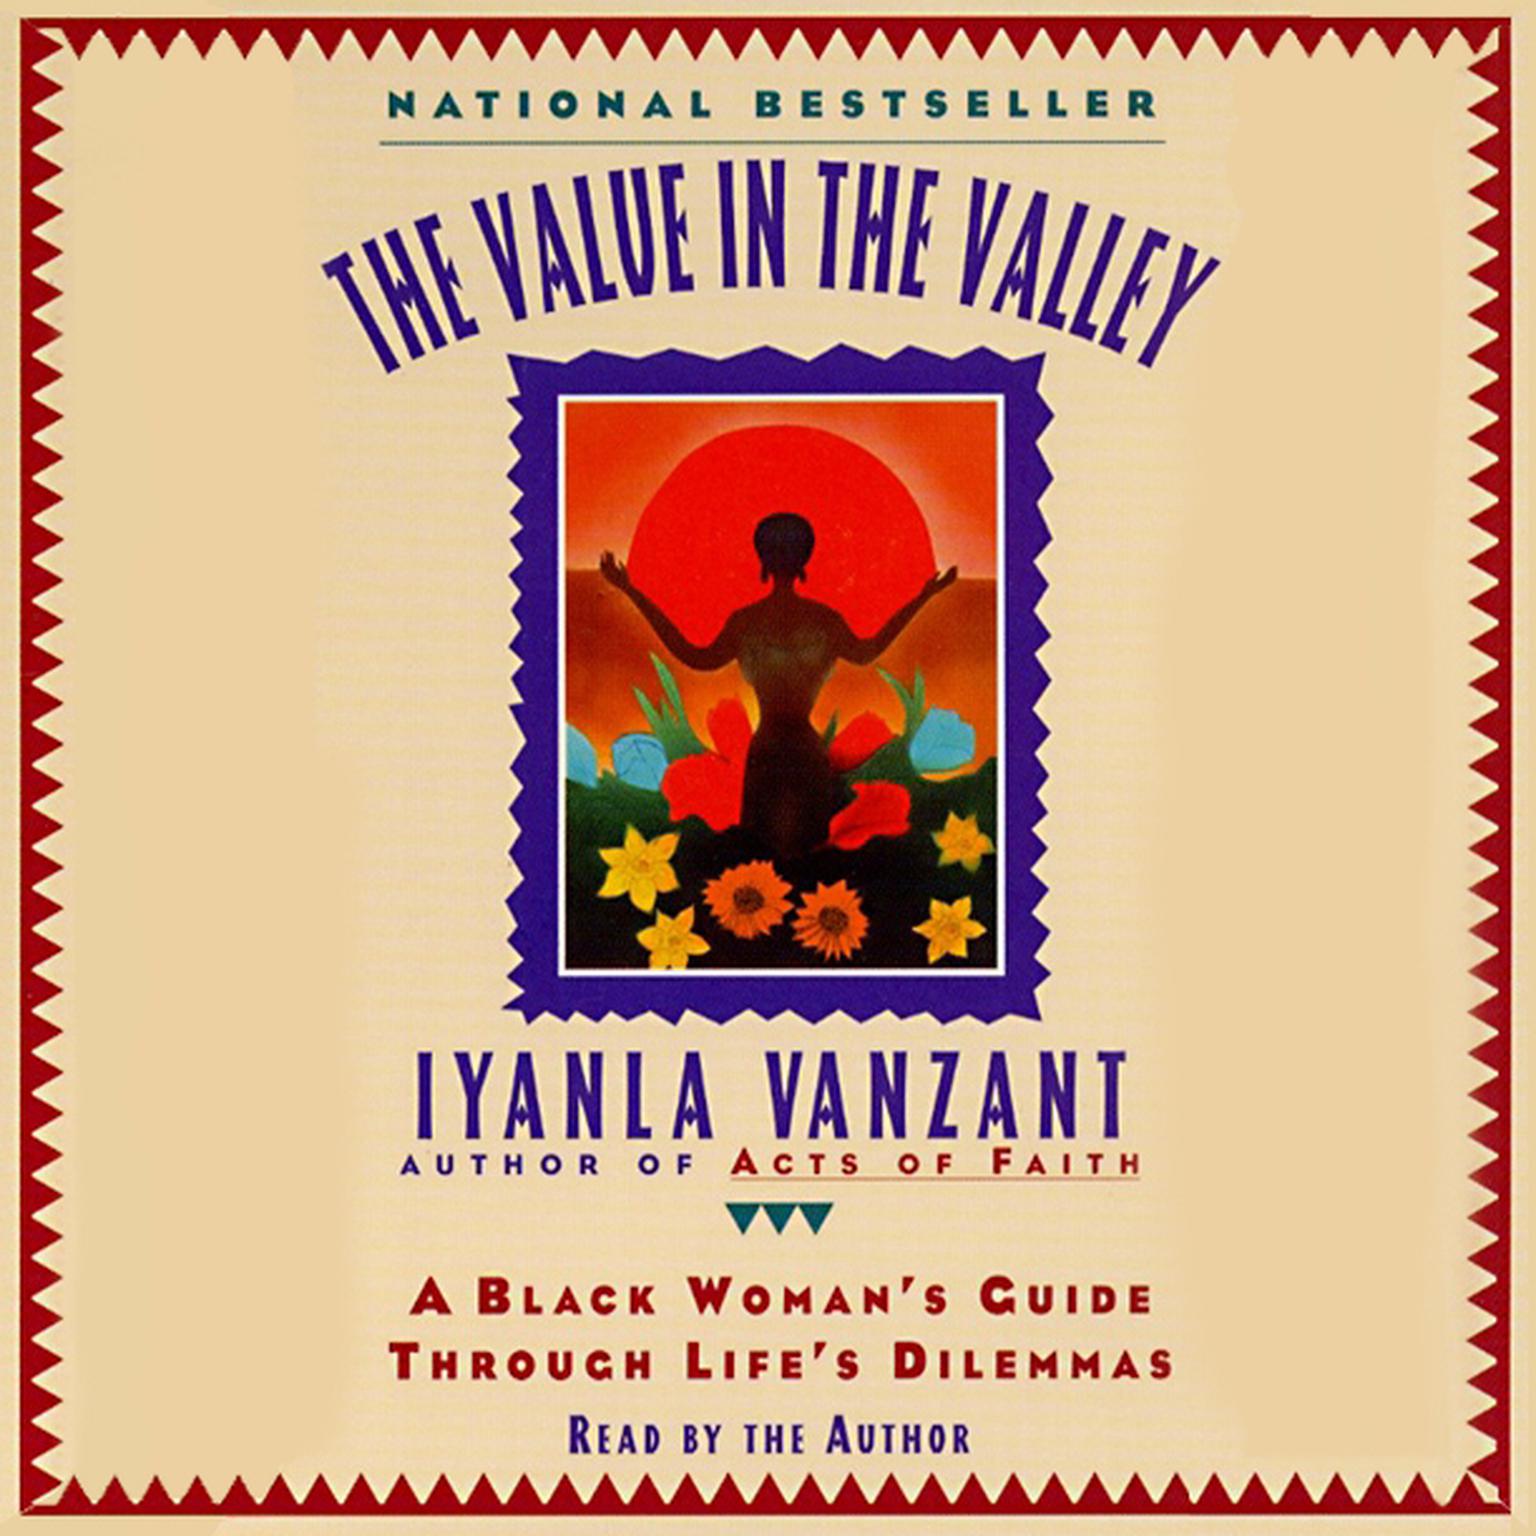 The Value in the Valley (Abridged): A Black Woman’s Guide through Life’s Dilemmas Audiobook, by Iyanla Vanzant